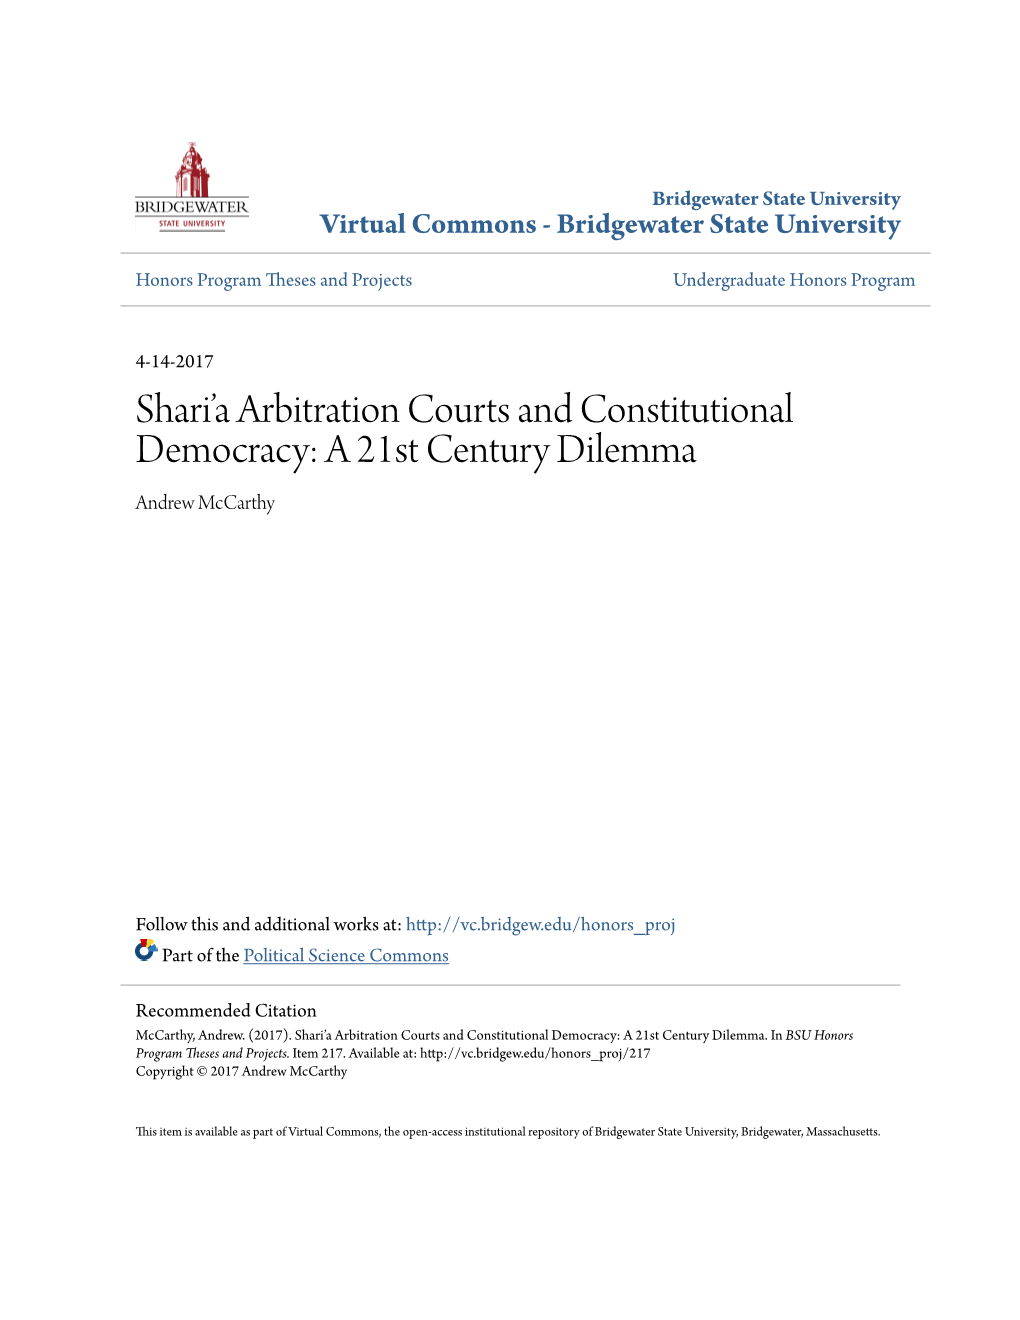 Shari'a Arbitration Courts and Constitutional Democracy